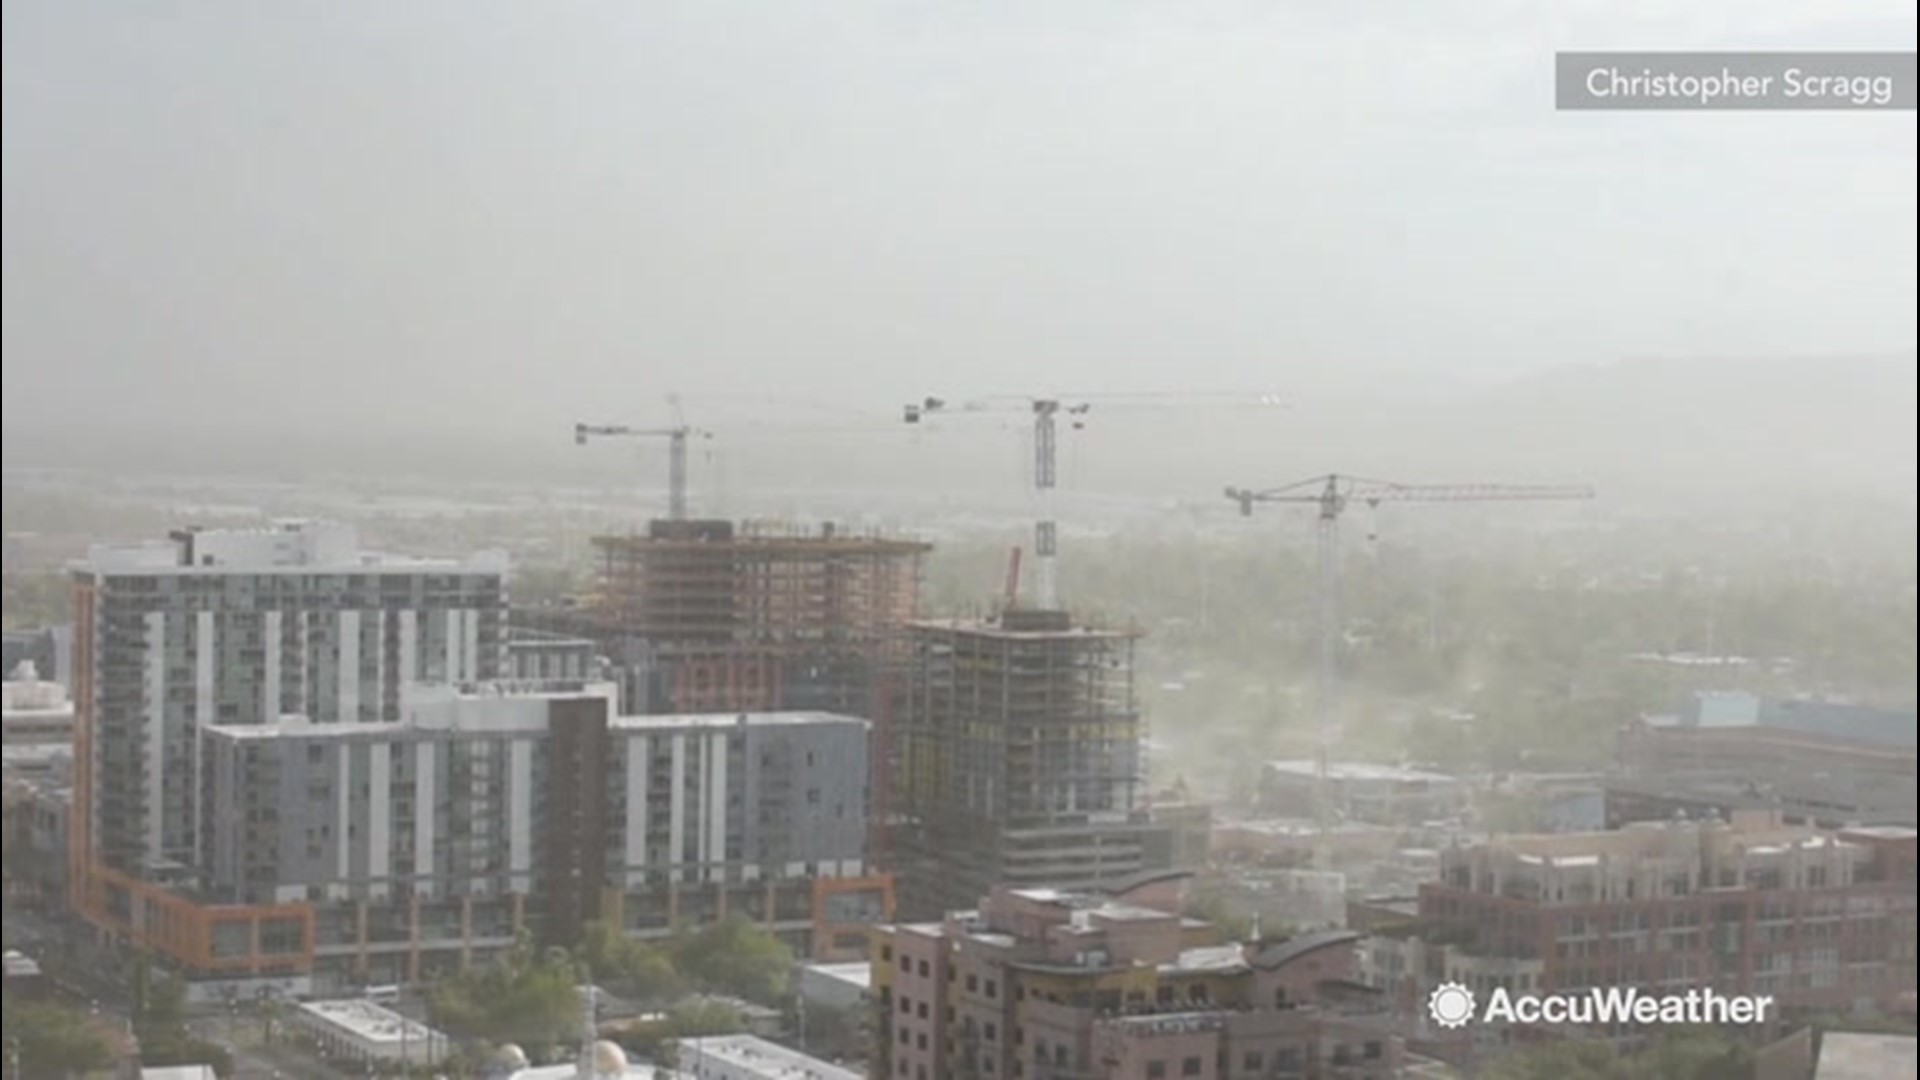 Gusty thunderstorm winds blew through Phoenix, Arizona, on September, 14, 2019, making construction cranes sway and lowering visibility across the city.